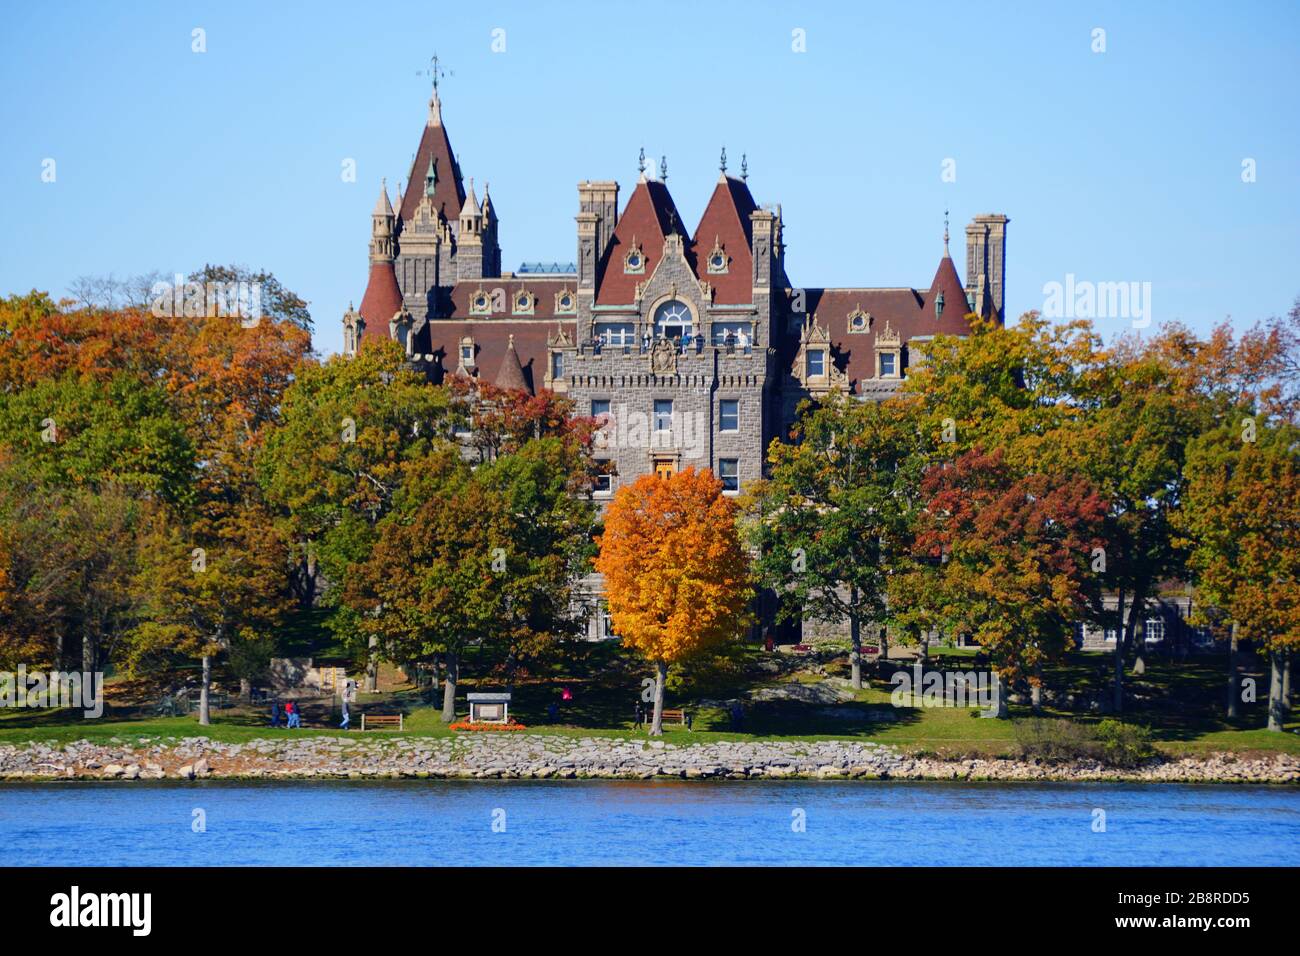 Alexandria Bay, New York, U.S.A - October 24, 2019 - The view of Boldt Castle surrounded by striking fall foliage along St Lawrence River Stock Photo